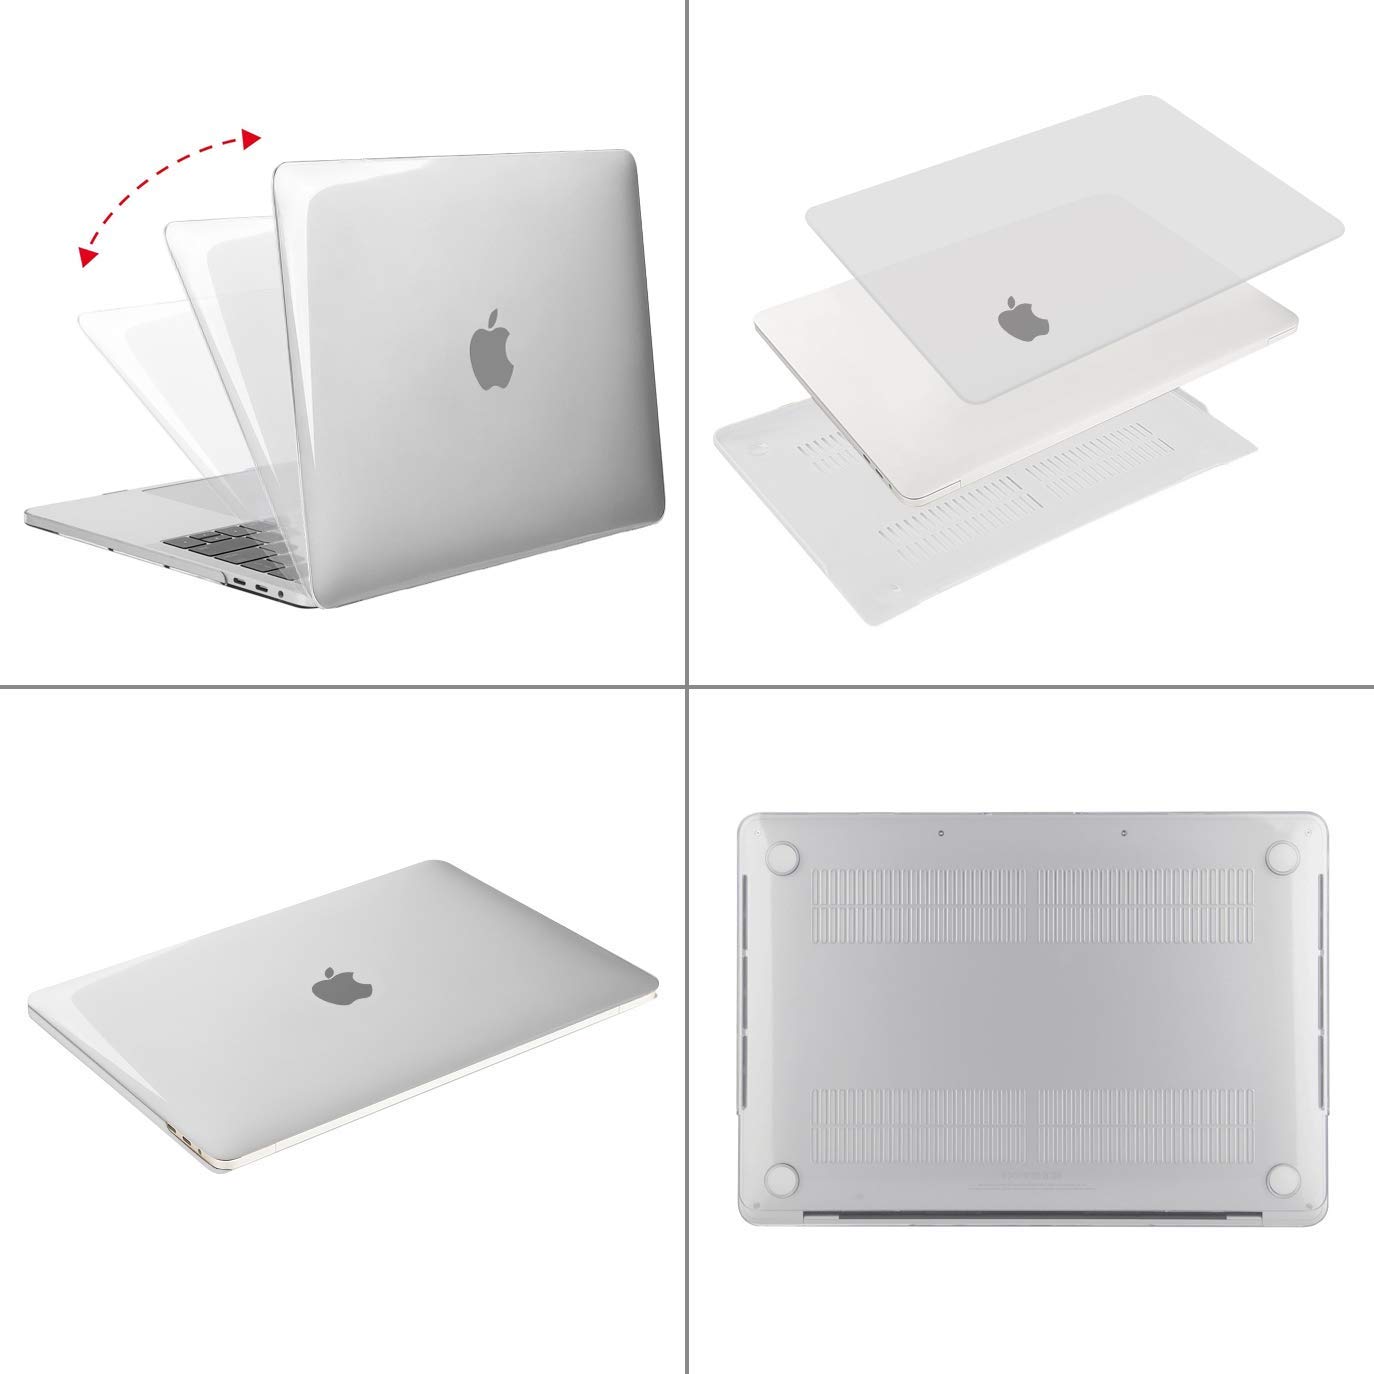 HF-MBP-CSC: MacBook Pro 13 Case 2019 2018 2017 2016 Release A2159 A1989 A1706 A1708, Plastic Hard Case Shell Cover Compatible with MacBook Pro 13 Inch with/Without Touch Bar and Touch ID, Crystal Clear - Click Image to Close